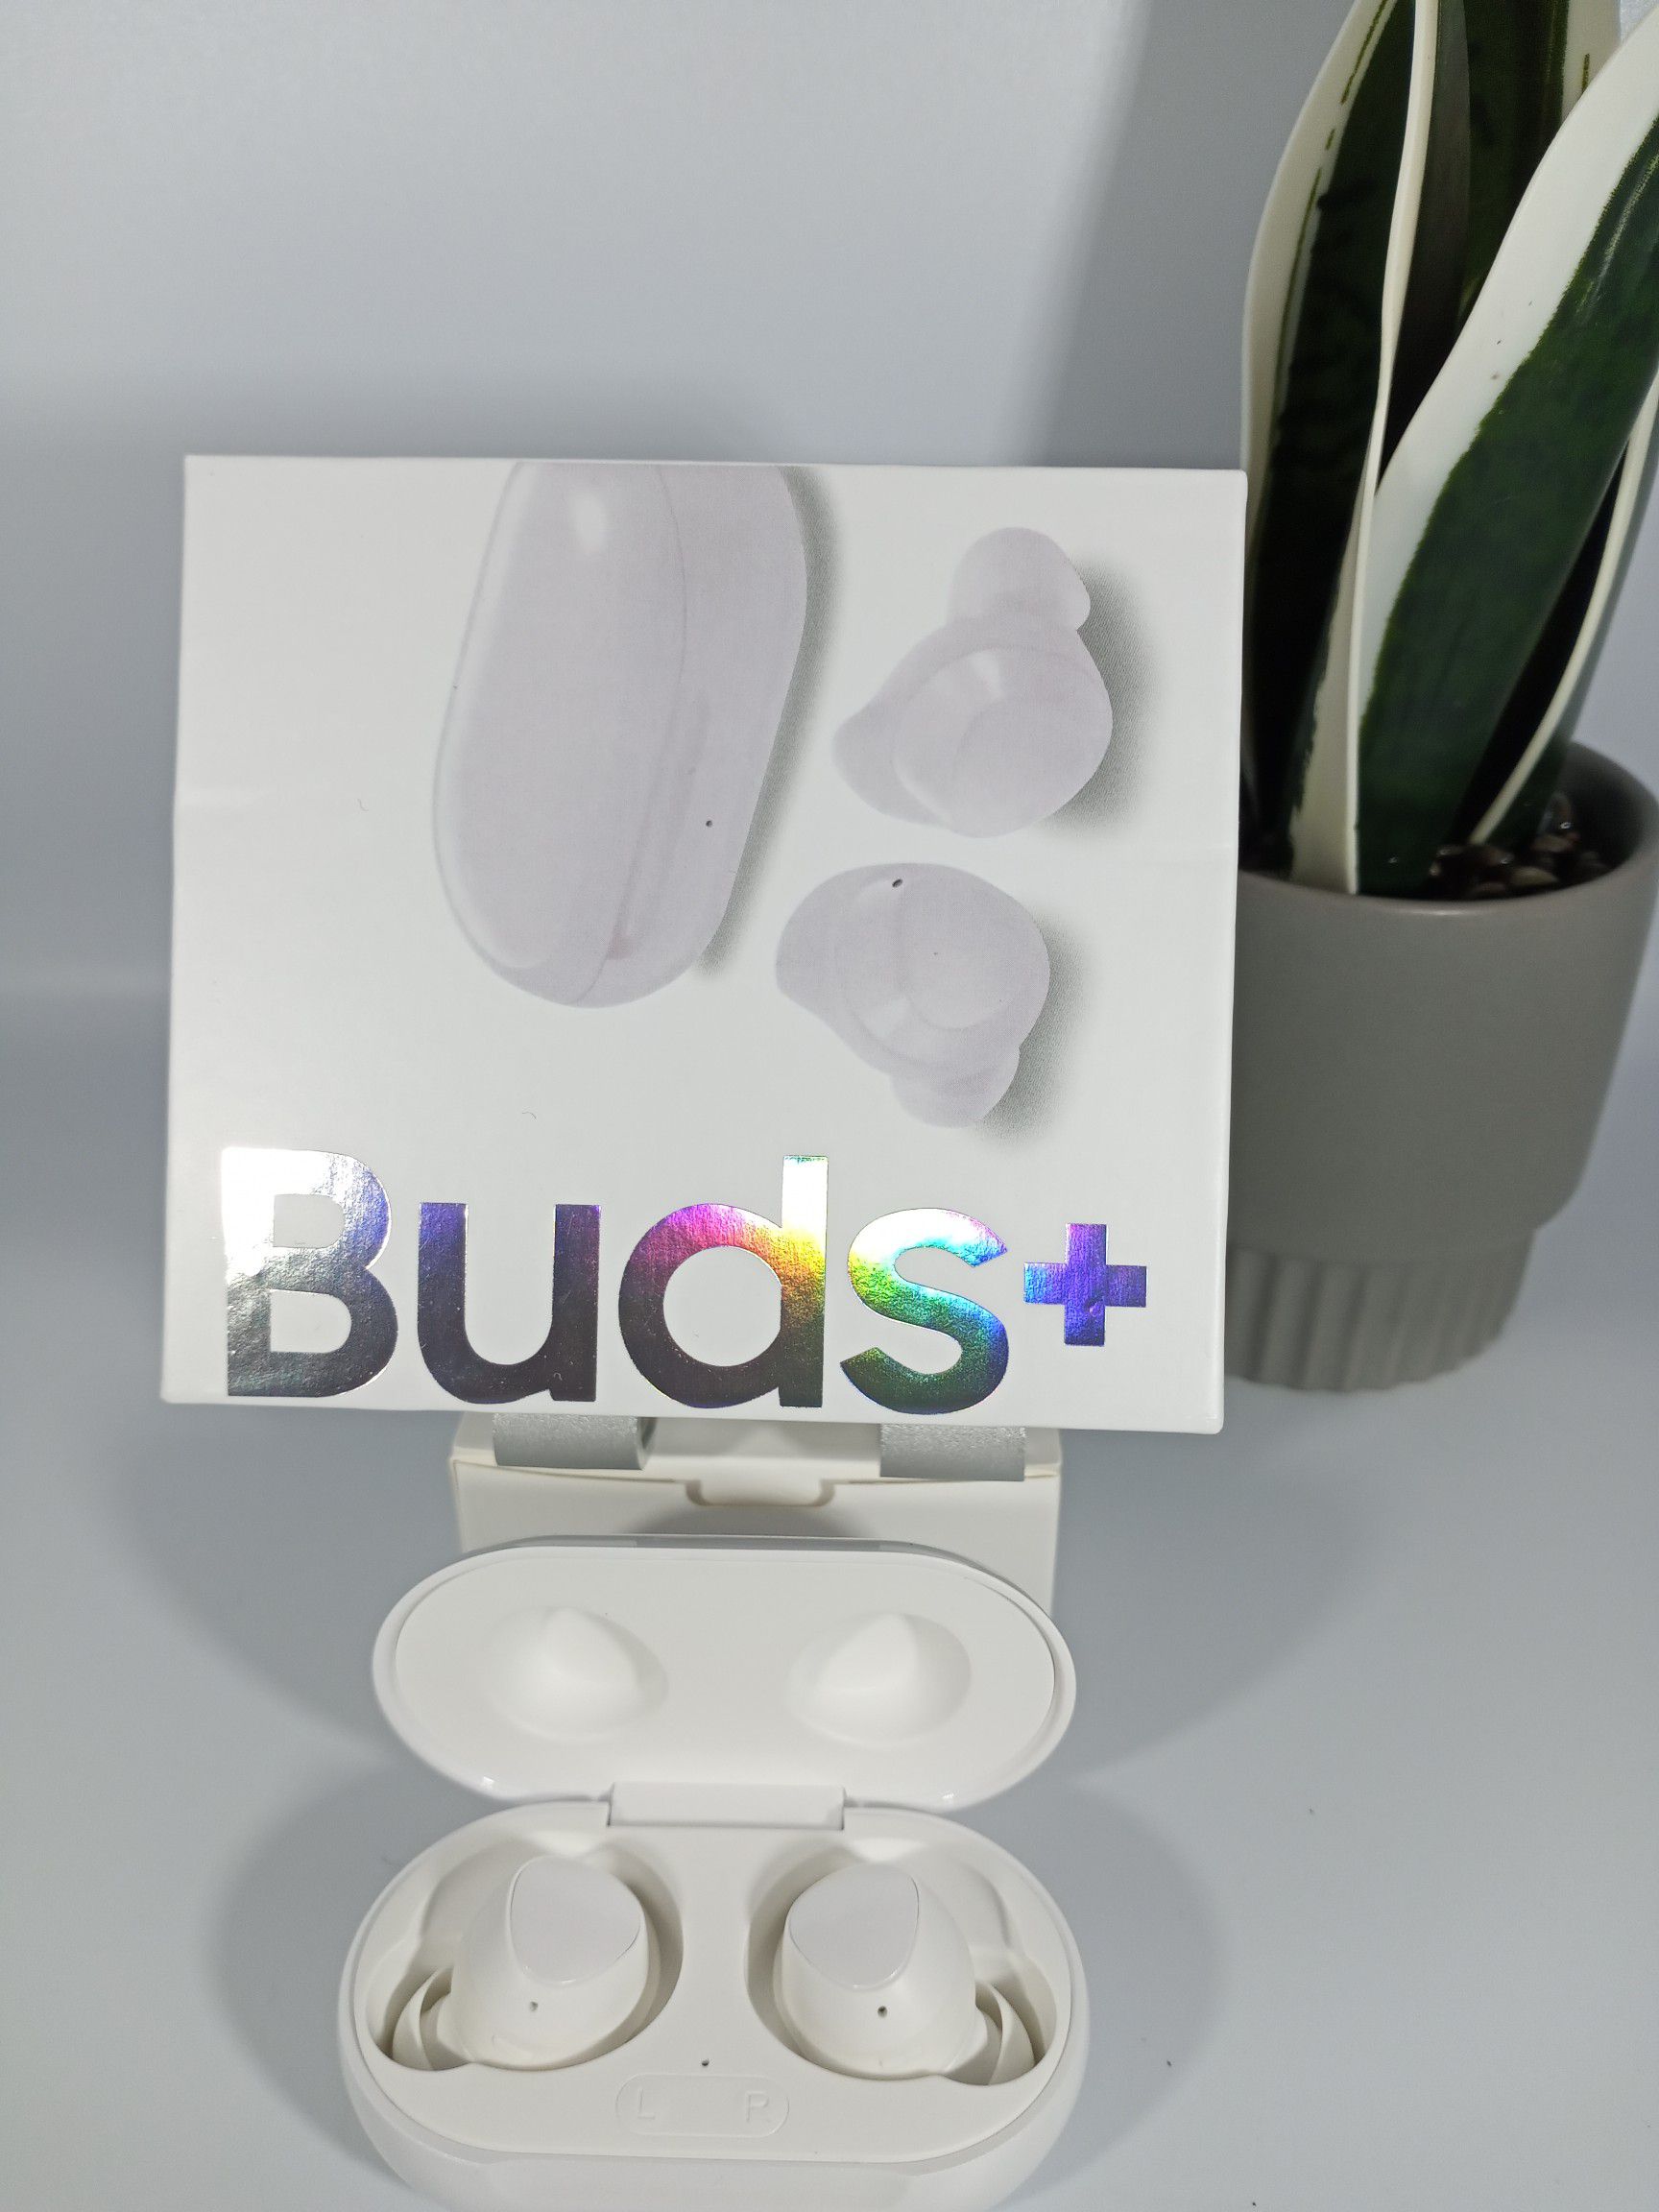 Buds + Earbuds, 11 hrs Play Time, 2 Way Speaker for Rich Sound, Triple Mics for Clear Voice Call and Qi Compatible Wireless Charging